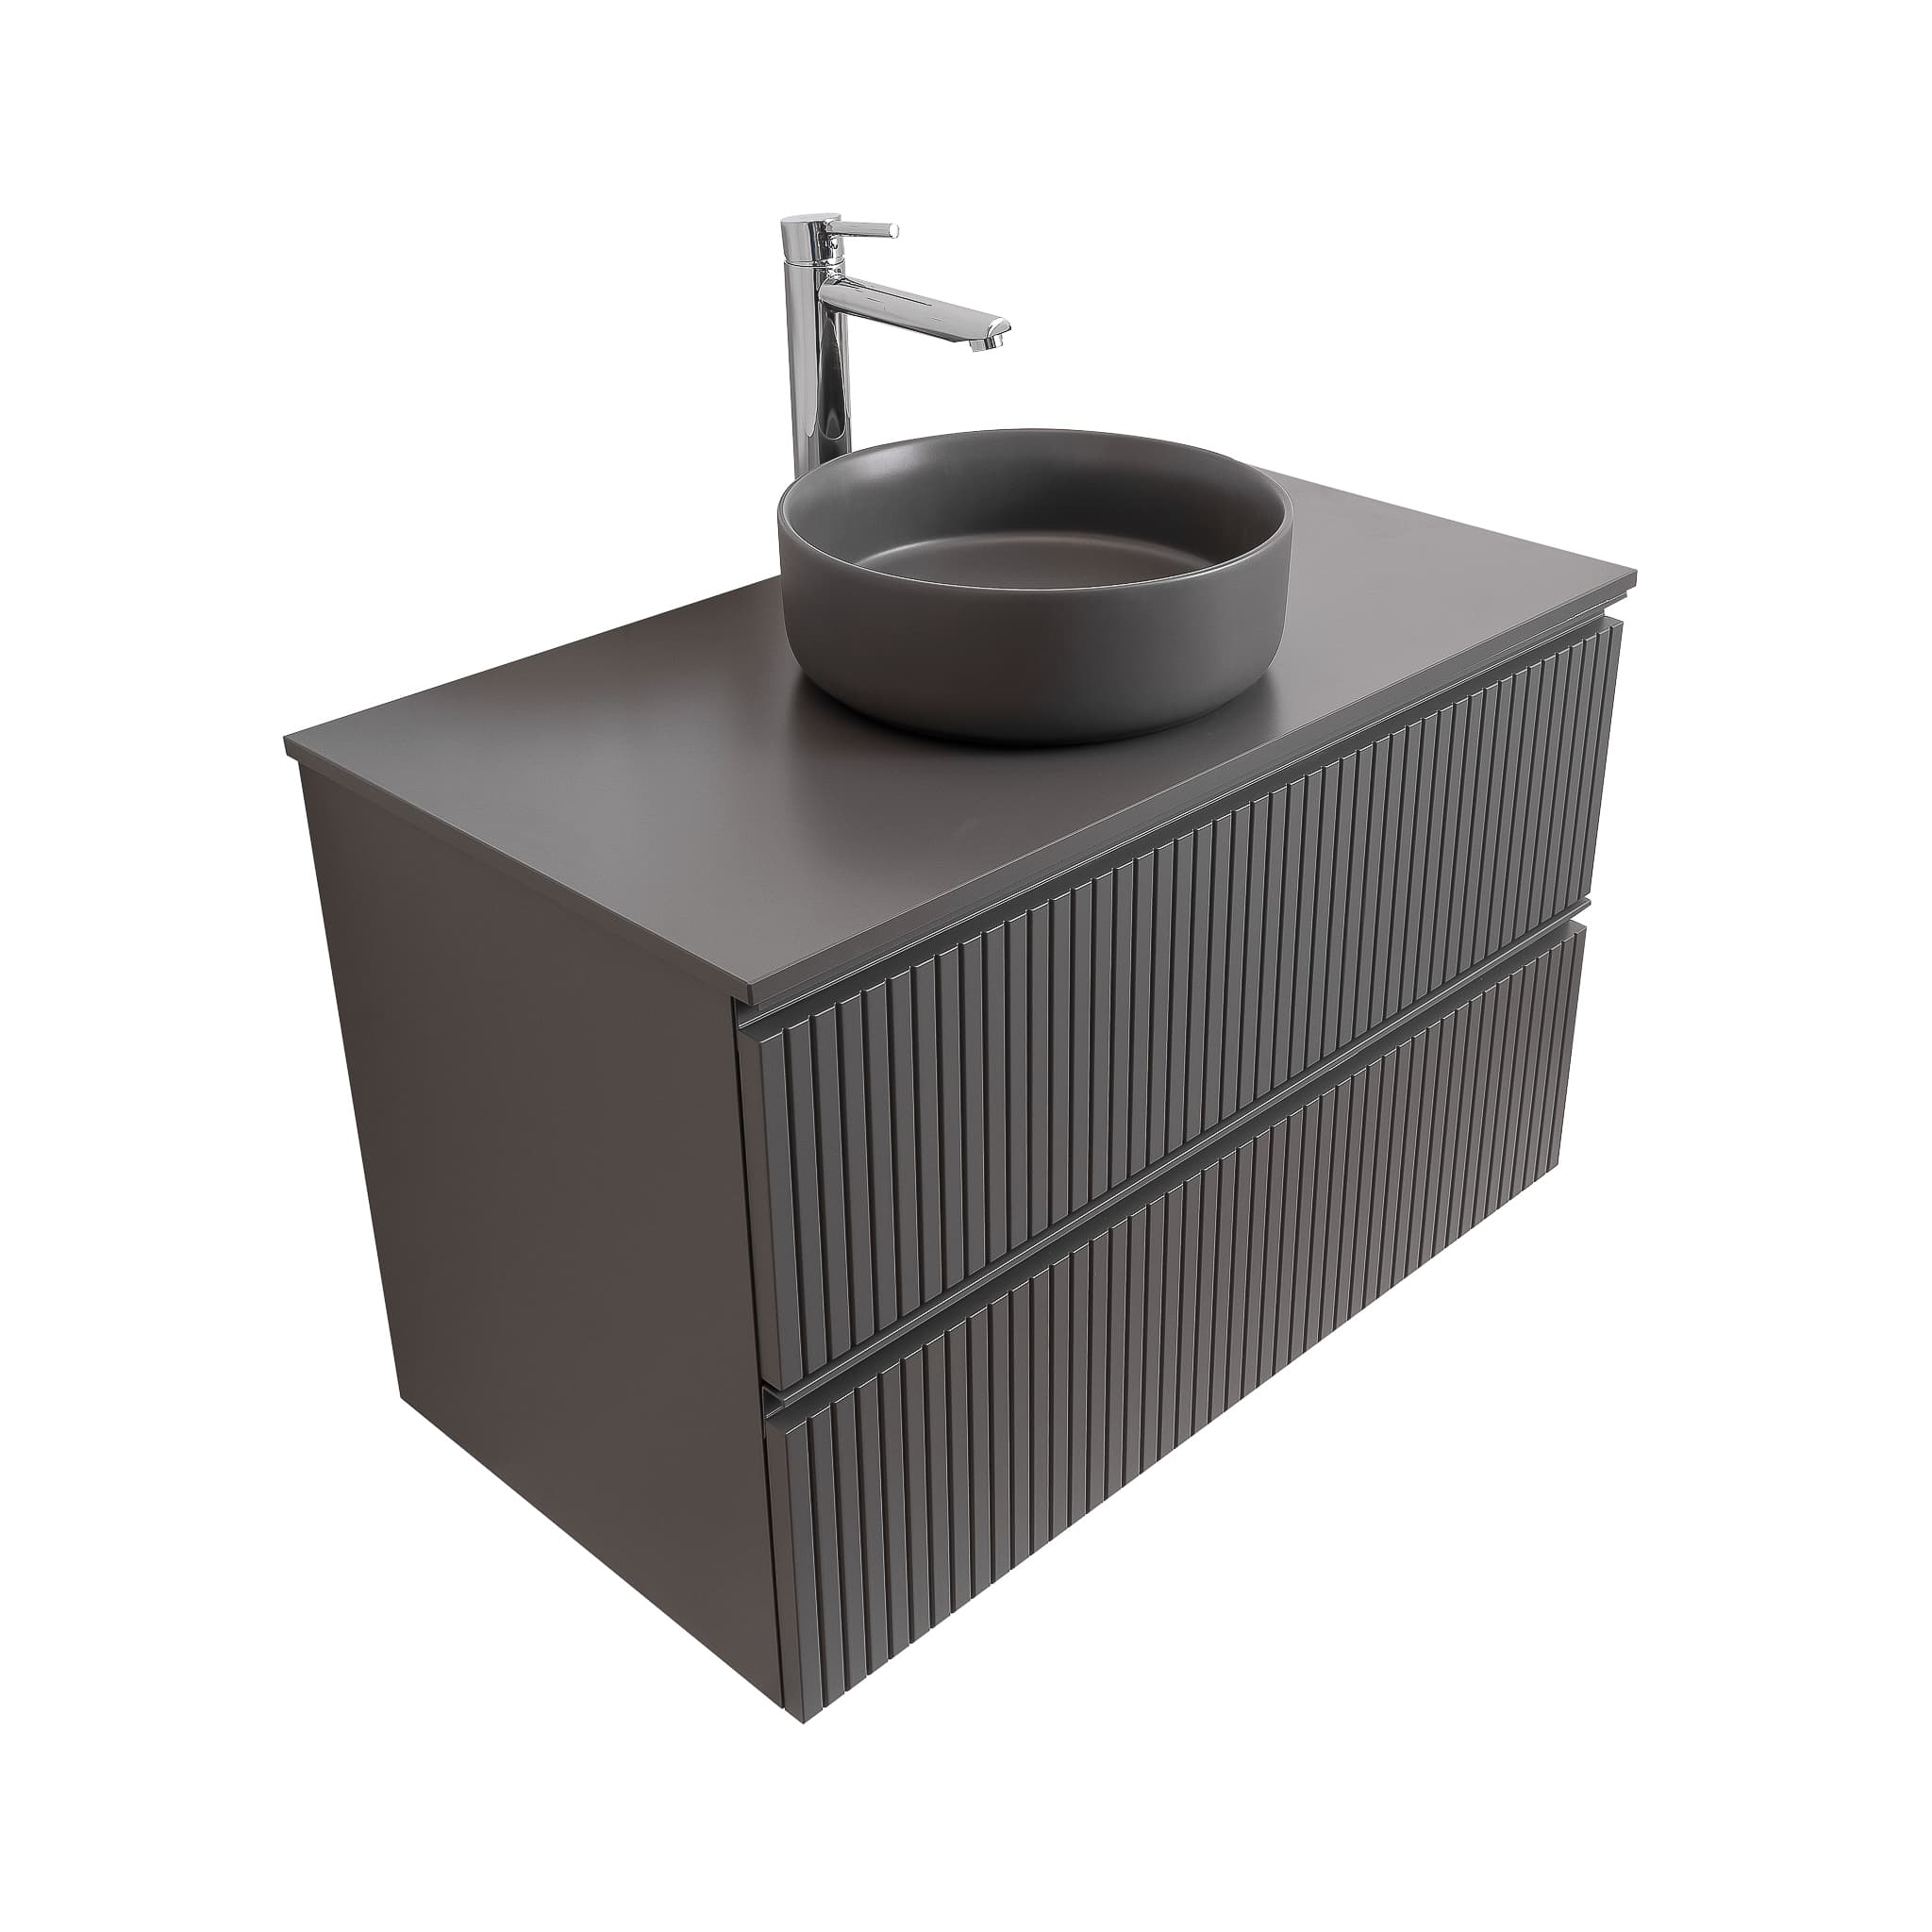 Ares 35.5 Matte Grey Cabinet, Ares Grey Ceniza Top And Ares Grey Ceniza Ceramic Basin, Wall Mounted Modern Vanity Set